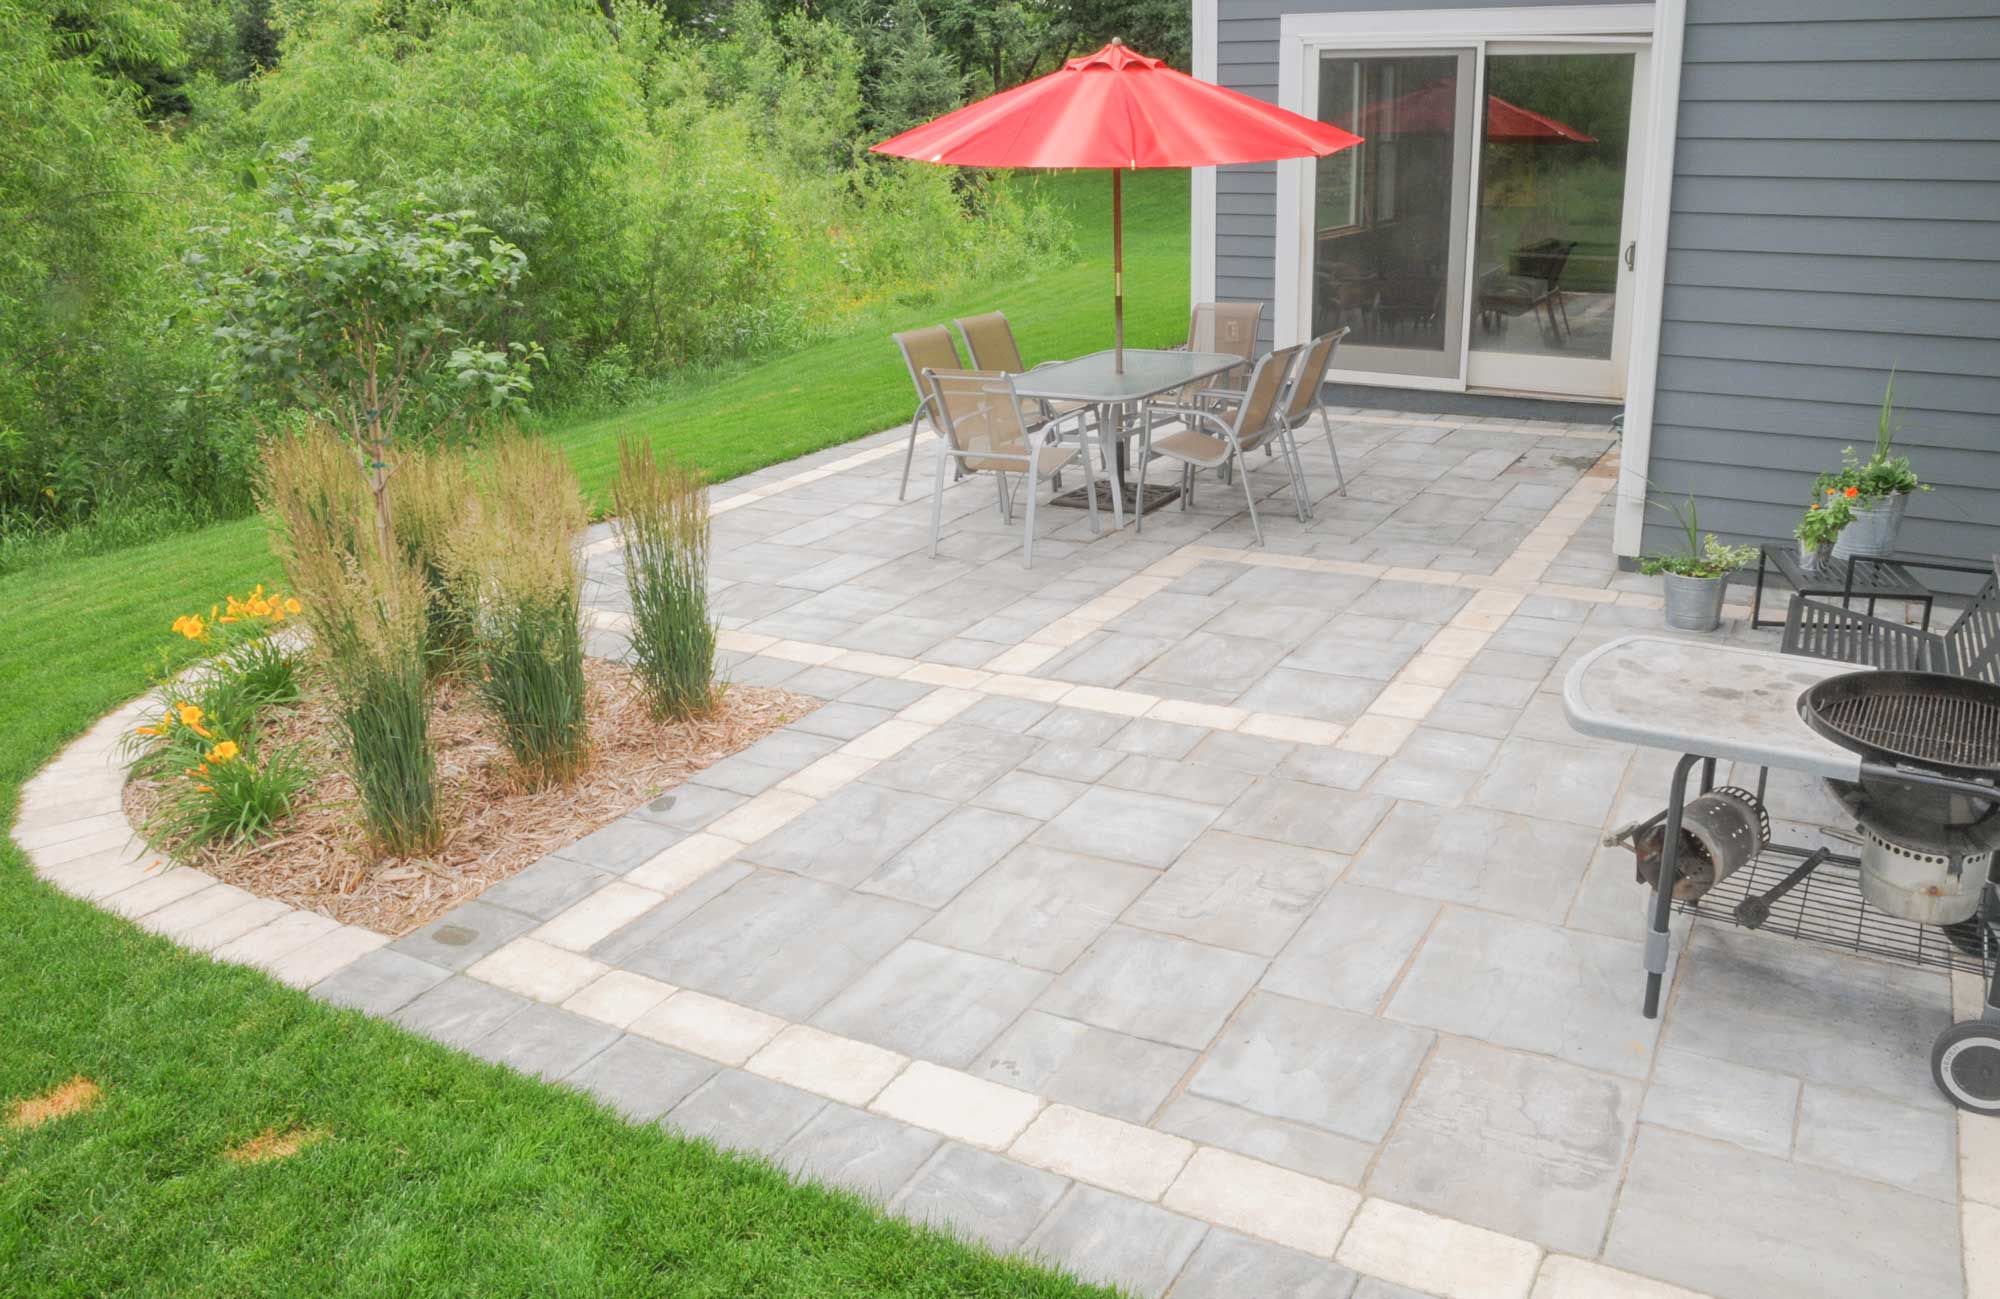 Pavers of a contrasting color neatly divide this large patio.